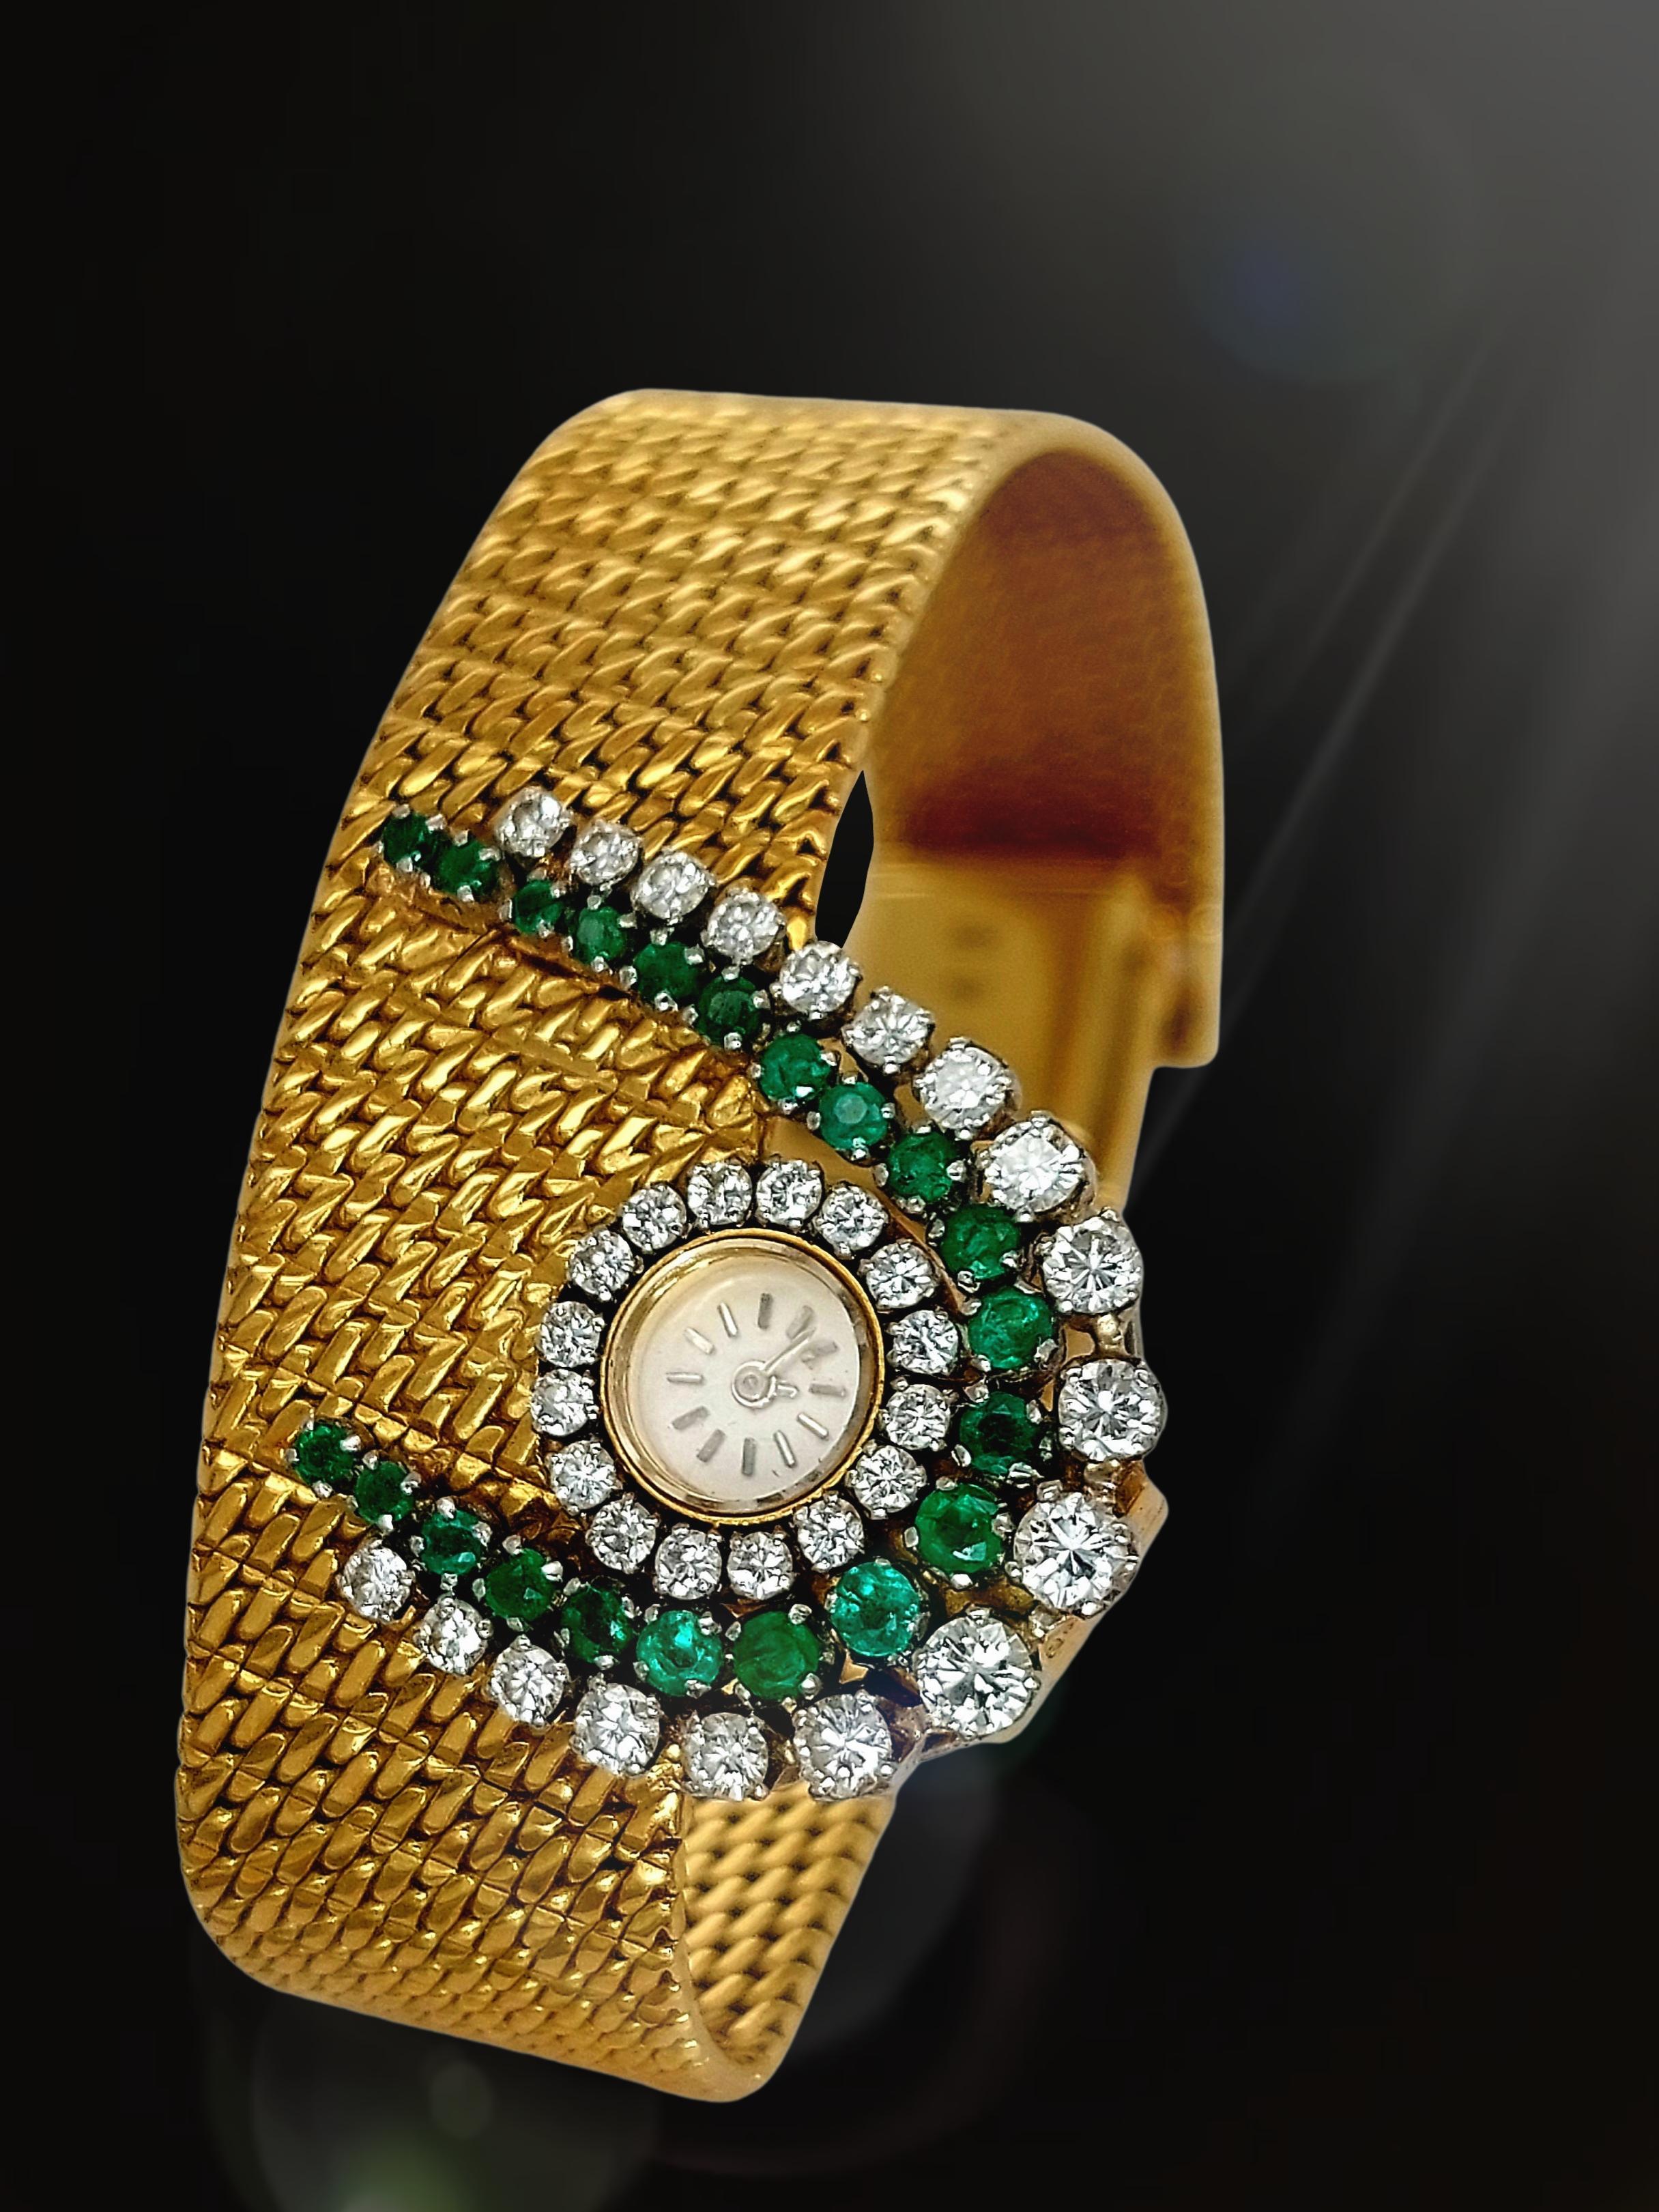 Collector Item, 18kt  Yellow Gold Vacheron Constantin Genève Bracelet Watch With Smallest Baguette Movement at the time.

Diamonds: 18+16 brilliant cut diamonds

Emerald: 21 emerald

Material: 18kt Yellow gold

Case: 18kt yellow and white gold,